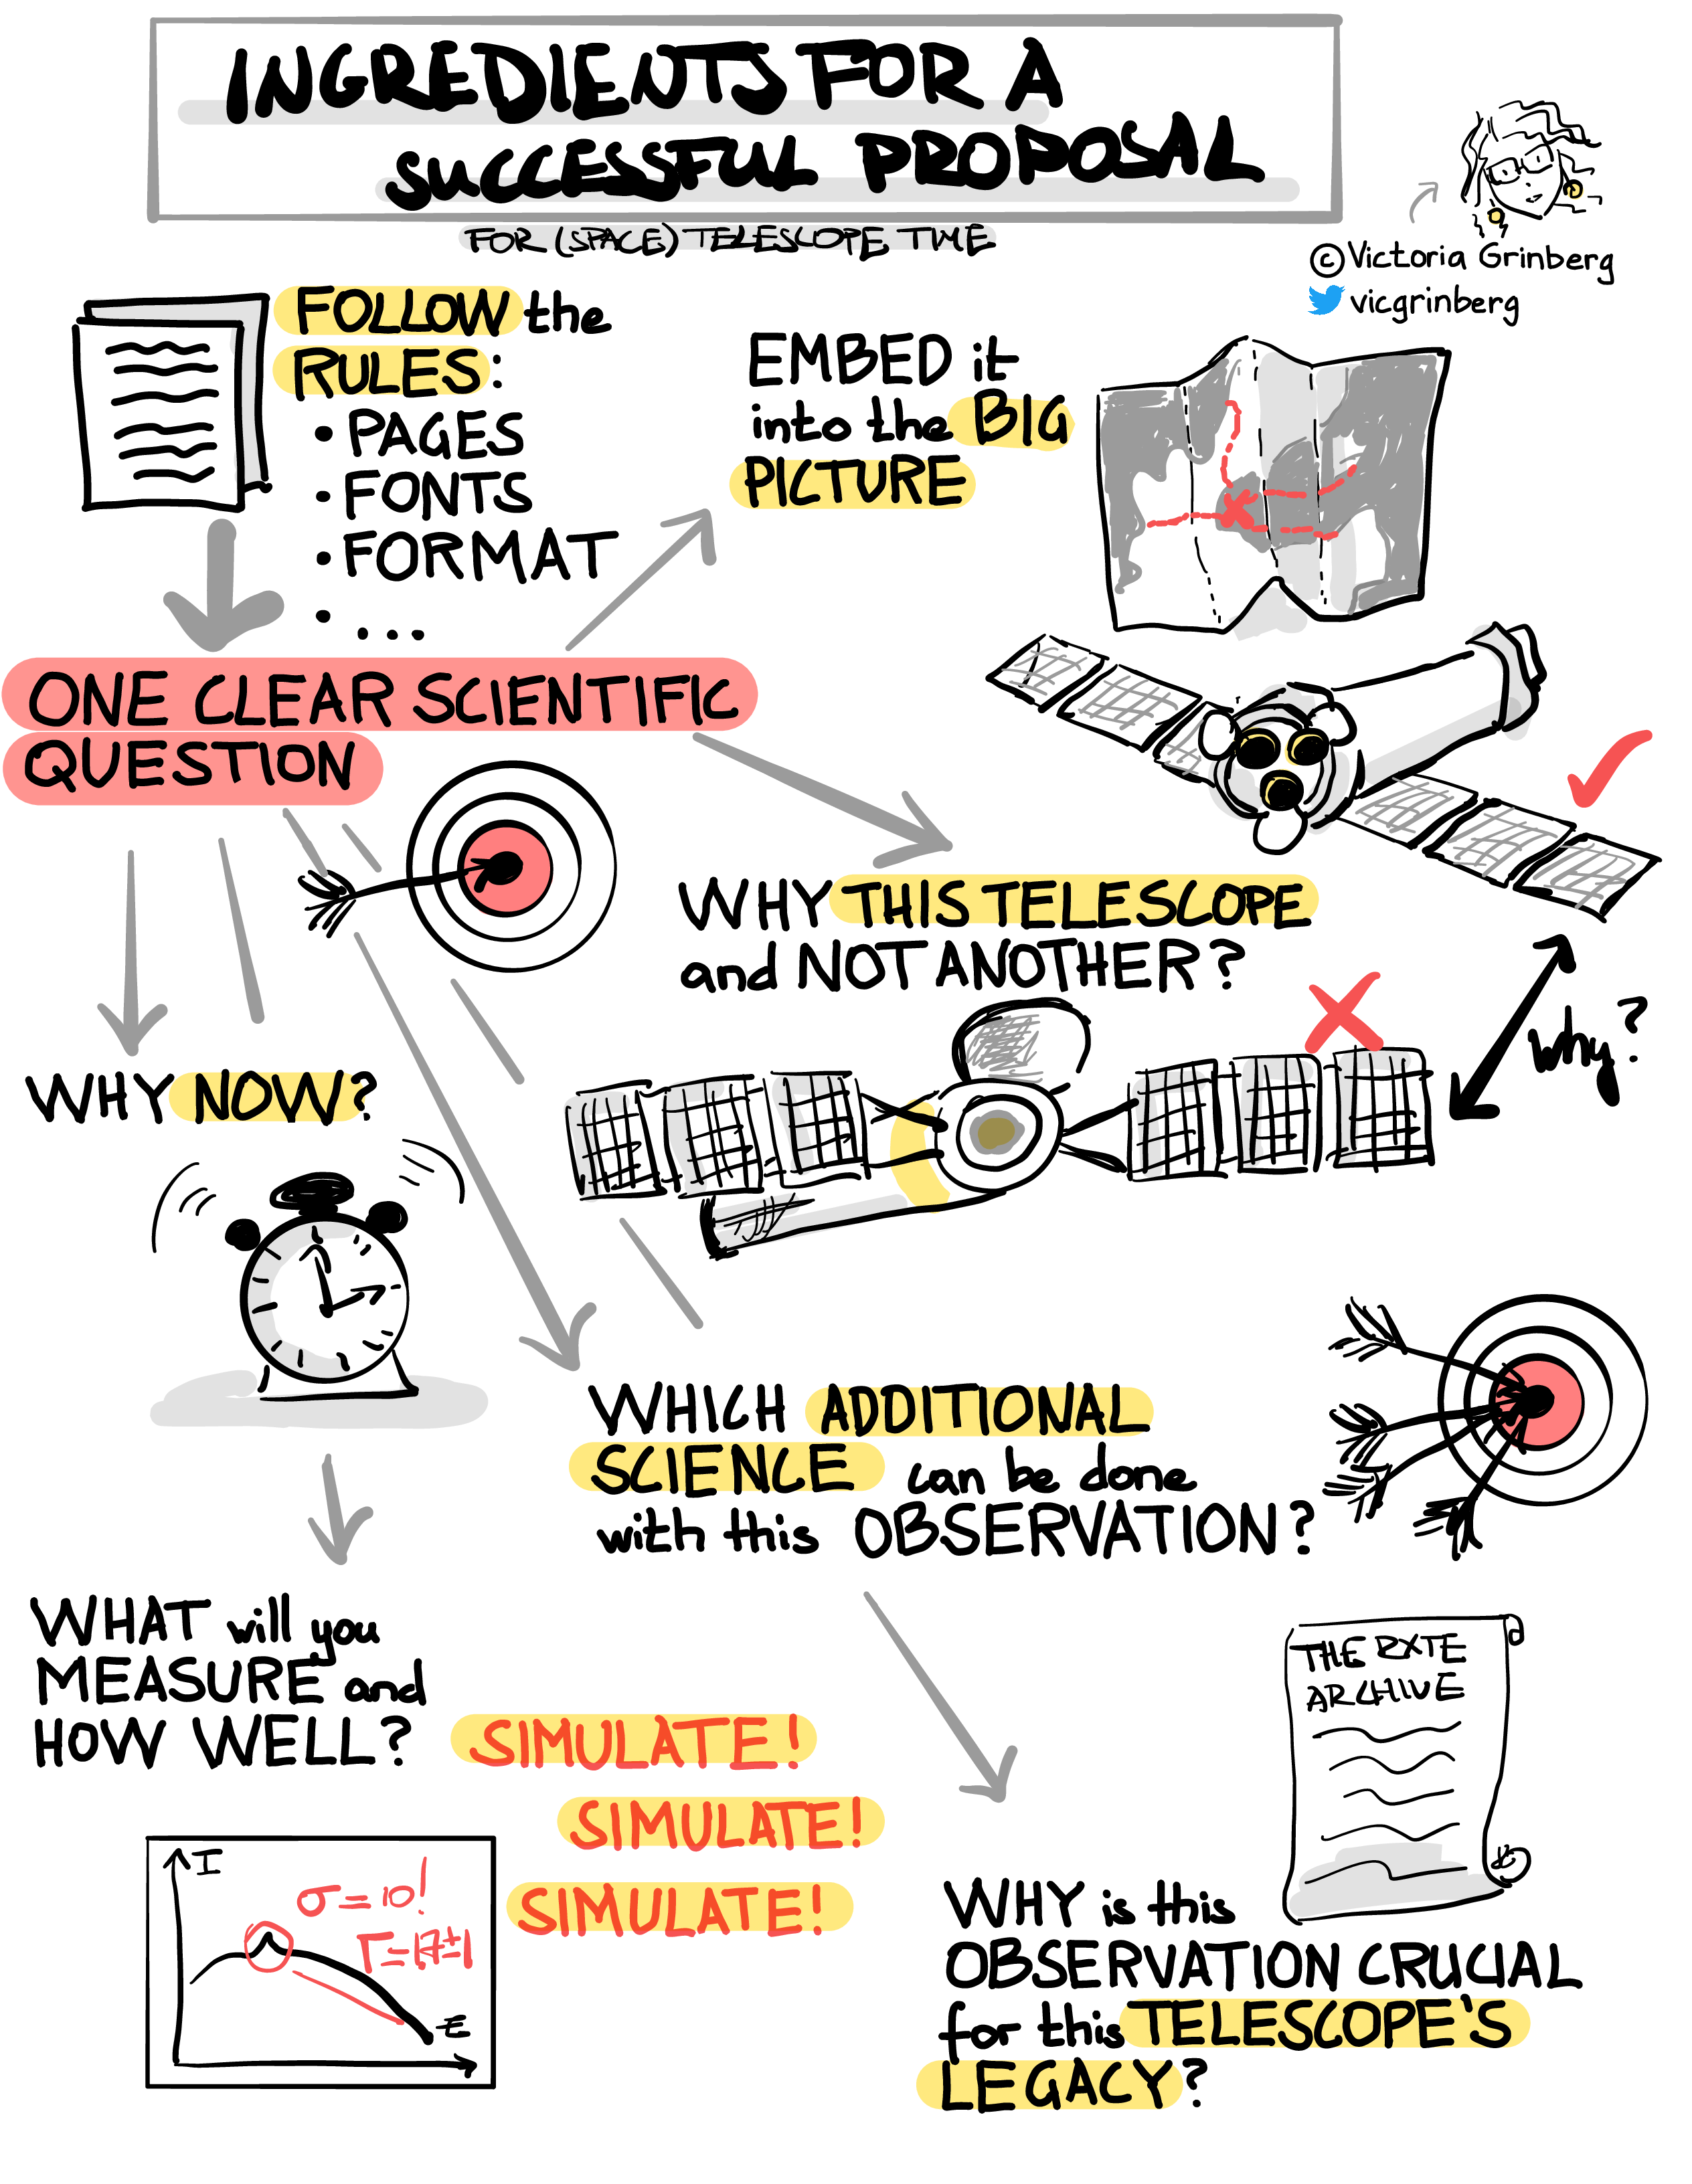 A sketchnote entitled 'Ingredients for a successful proposal (for space telescope time)': Follow the rules (pages, fonts, format ...) 'arrow' One clear scientific questions 'multiple arrows leading to questions' Why now? Why this telescope and not another? Which additional science can be done with this observation? What will you measure and how well (simulate! simulate! simulate!)? Why is this observation crucial for this telescope's legacy?